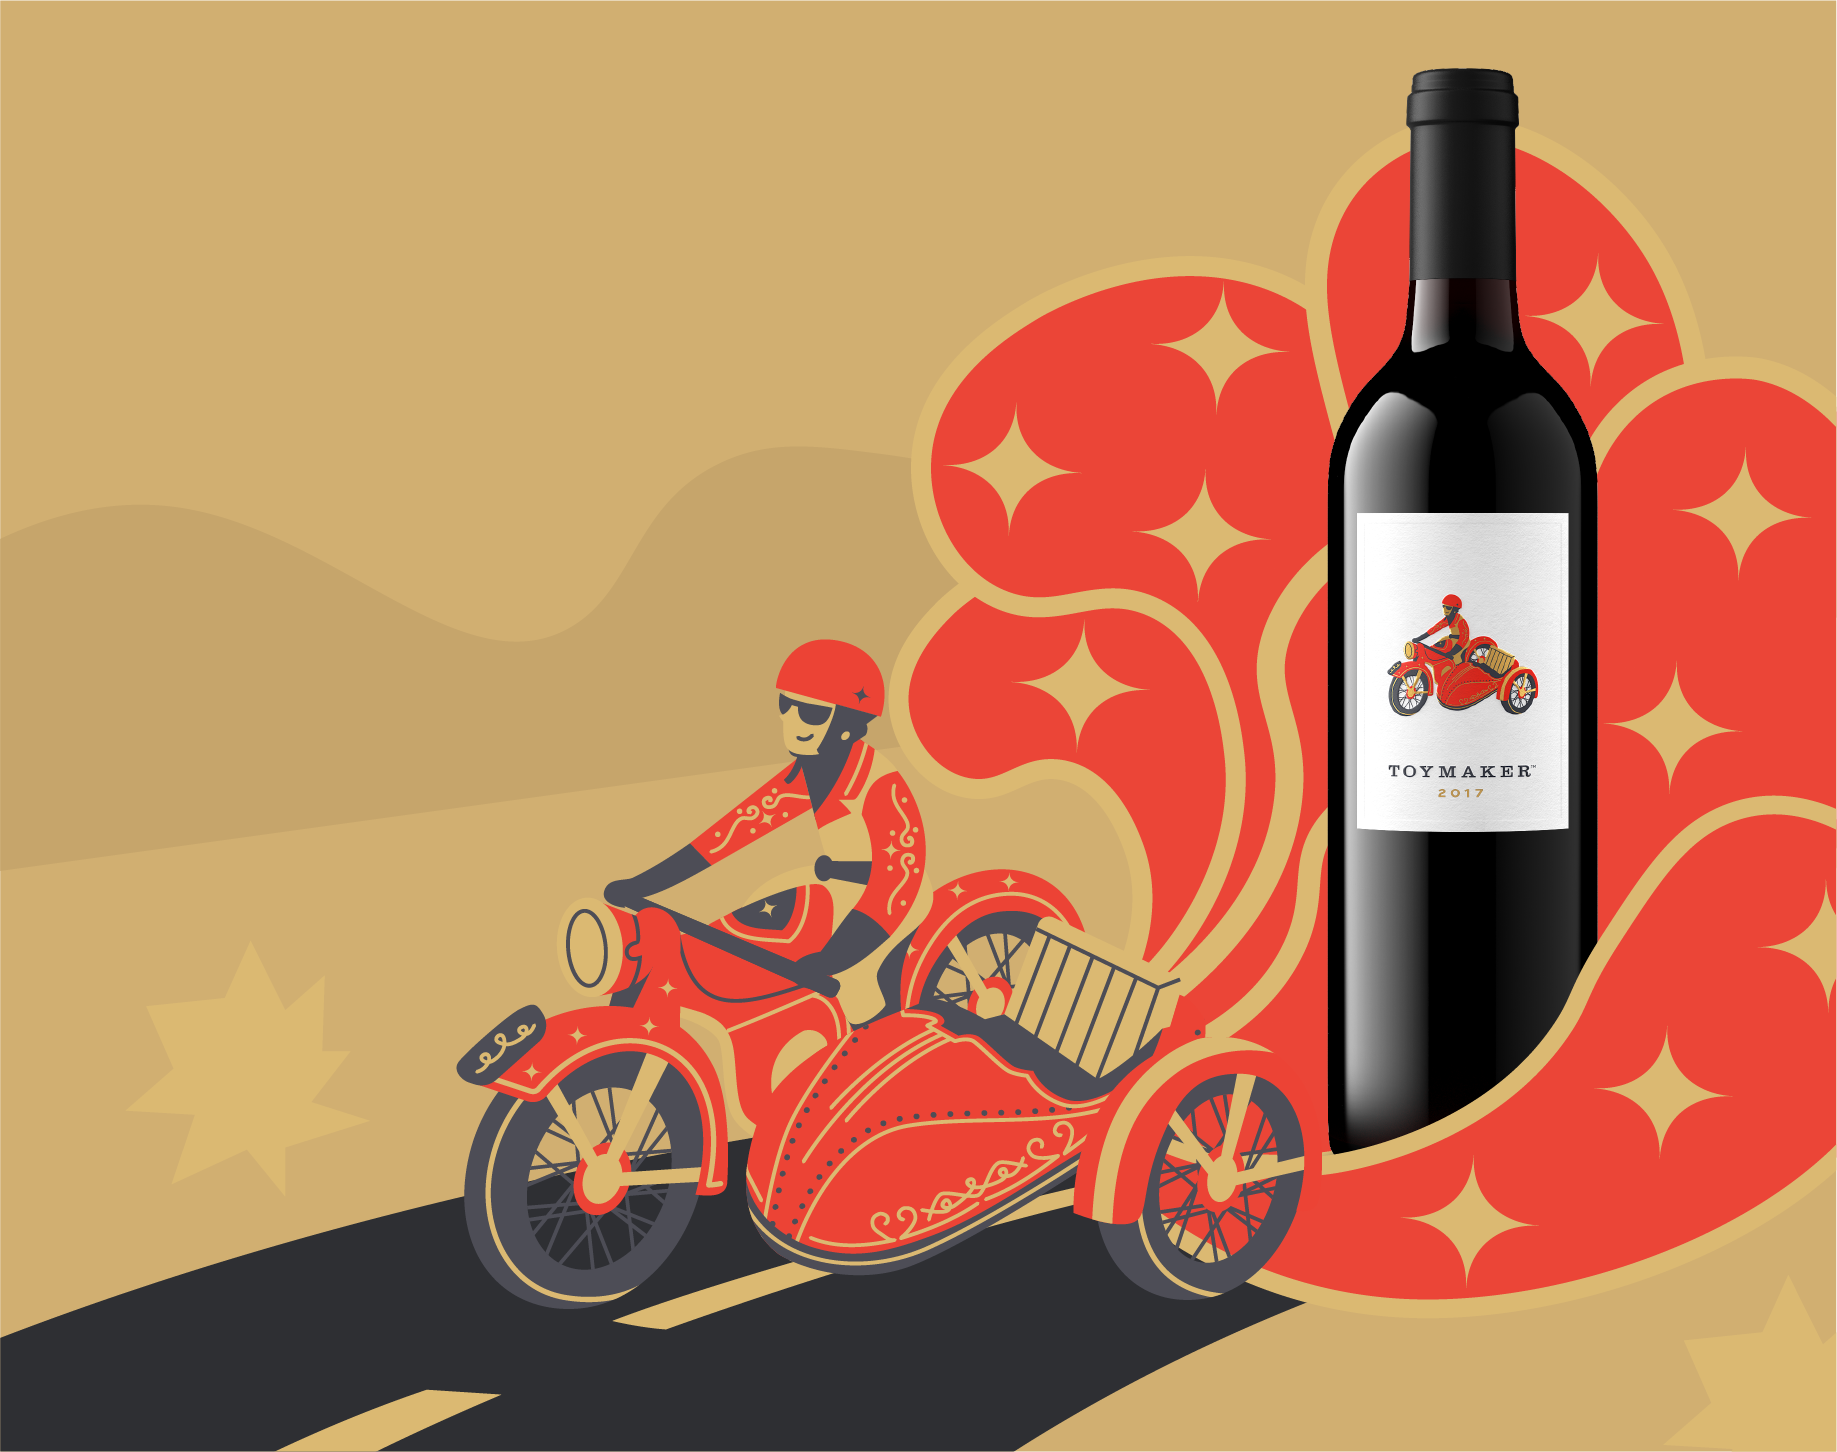 Illustrated image of a toy motorcycle with side car and driver on a make-believe desert road with tumbleweeds and hills in the background. From behind the motorcycle and sidecar with is a large, colorful plume of dust arising from which is emerging an image of a bottle of the 2017 ToyMaker Cabernet Sauvignon 750 ML wine bottle.